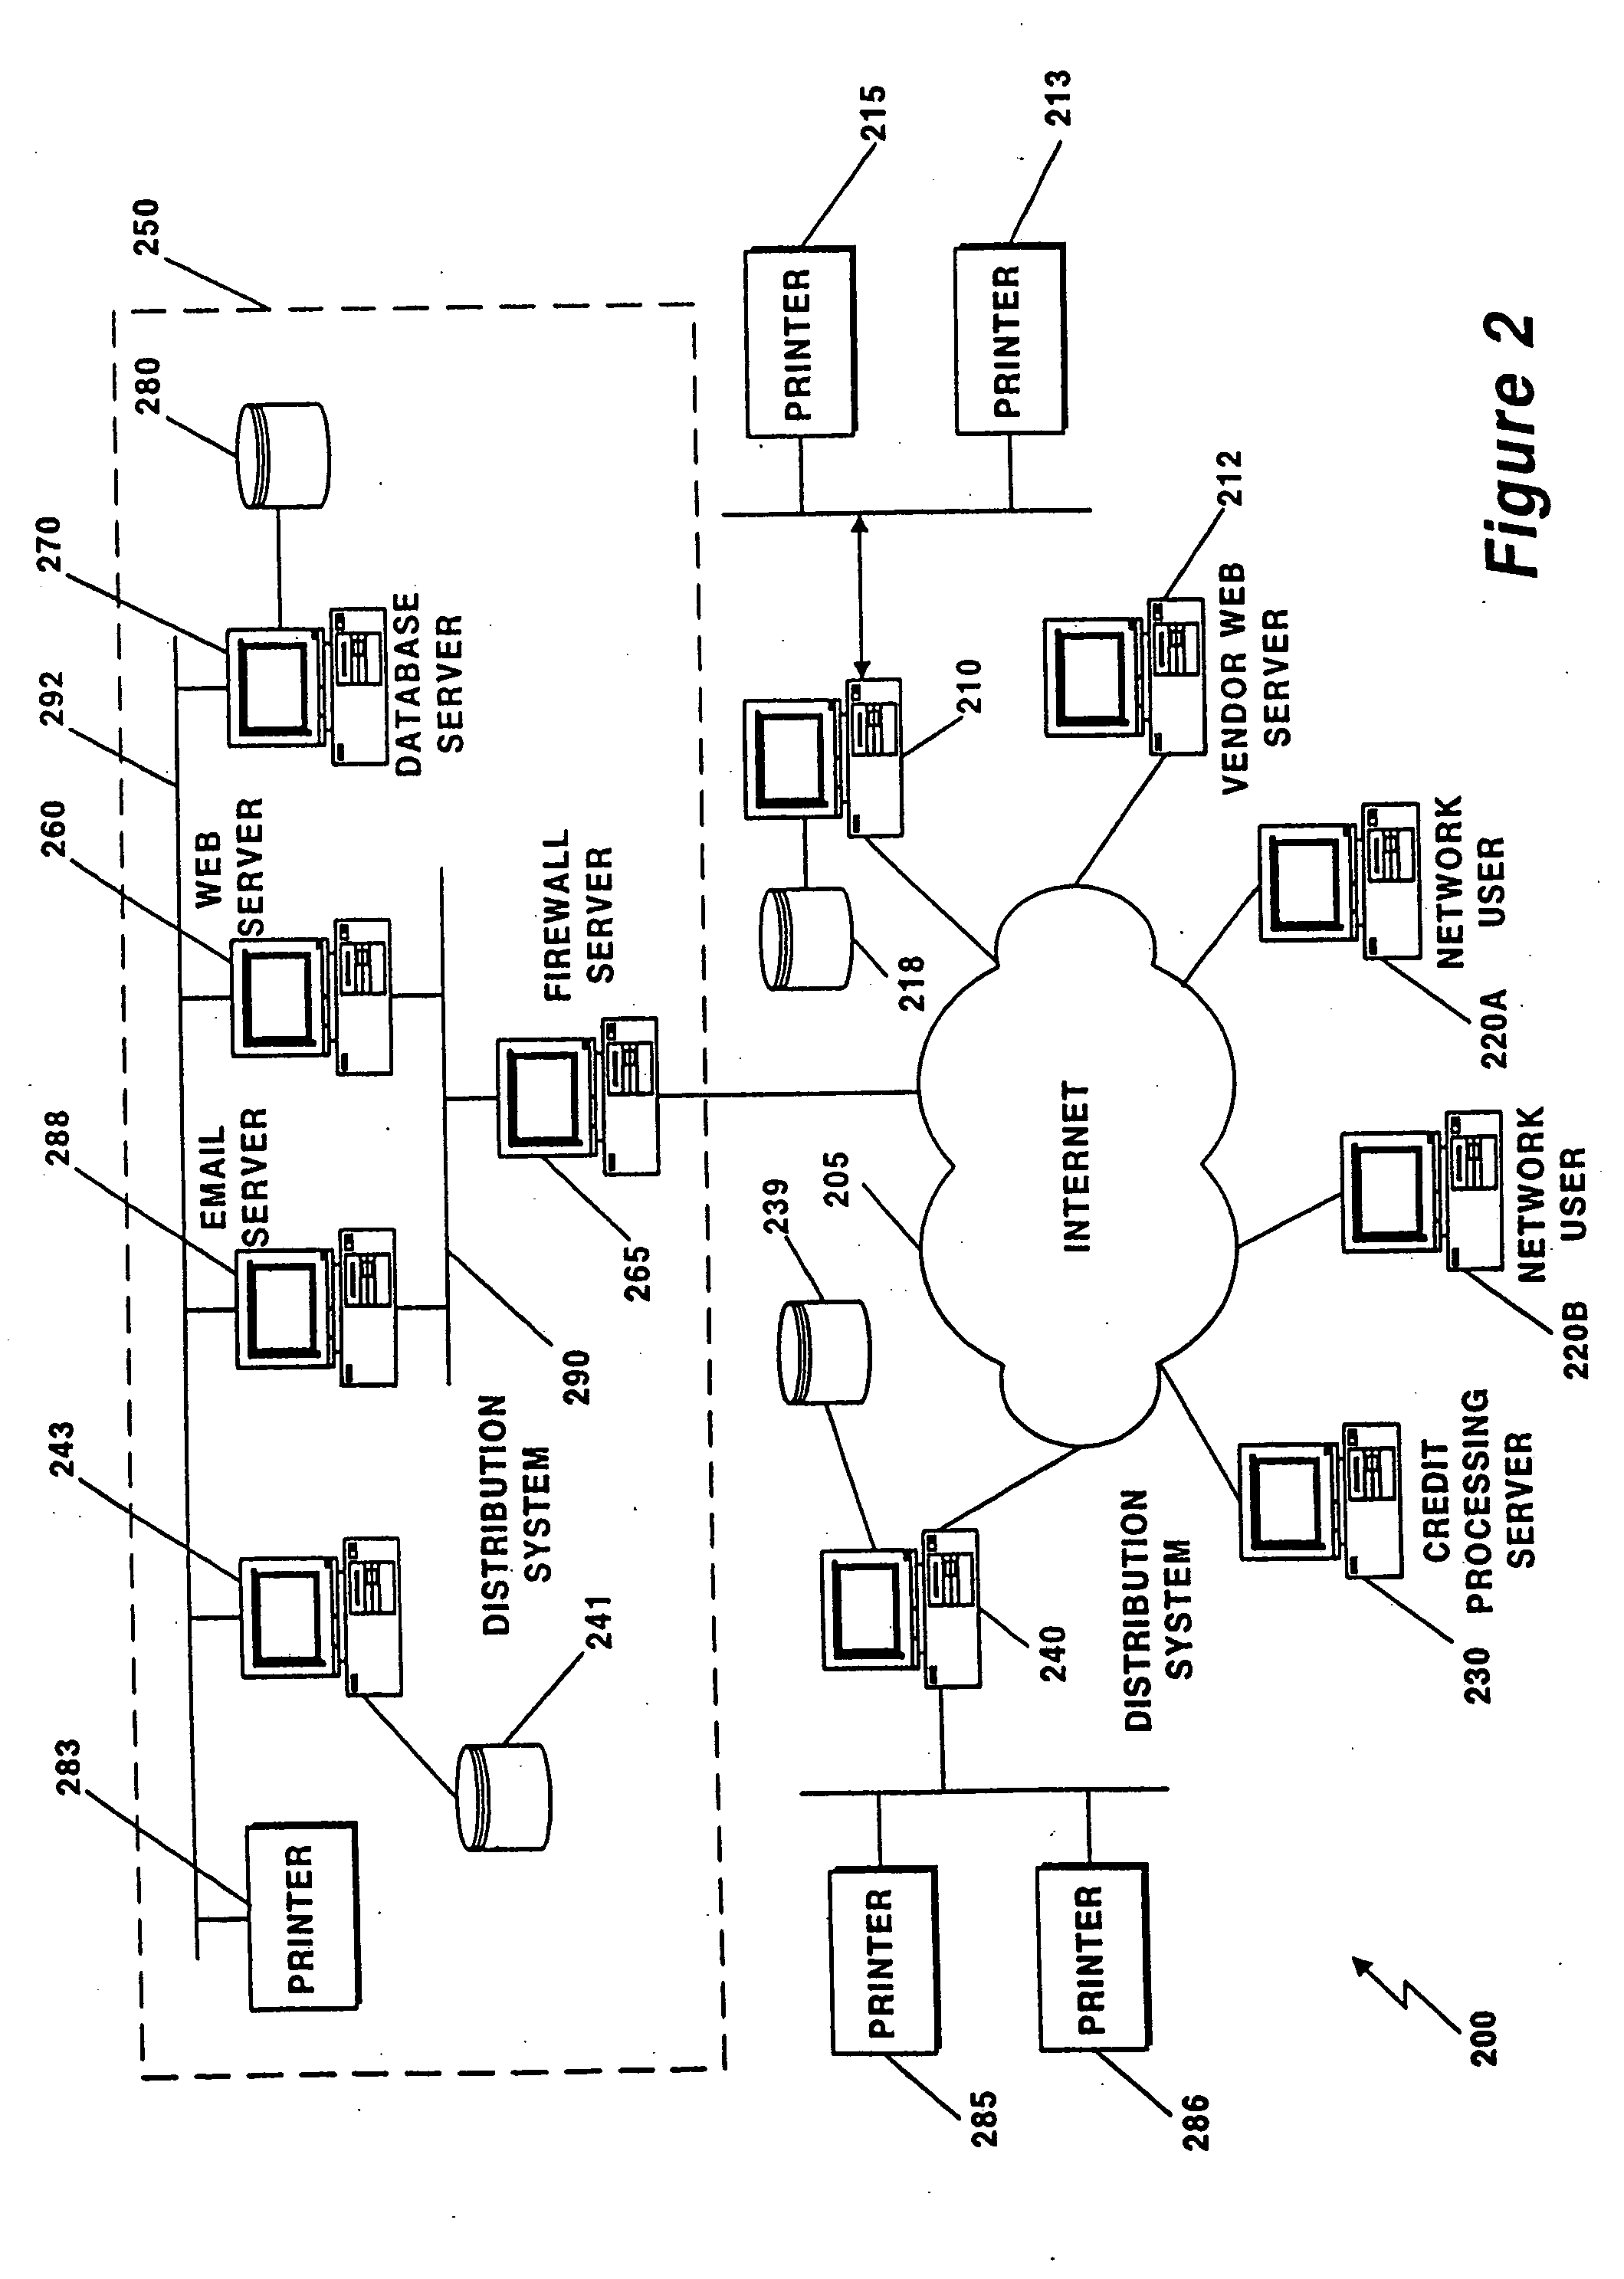 Method and apparatus for distribution of greeting cards with electronic commerce transaction